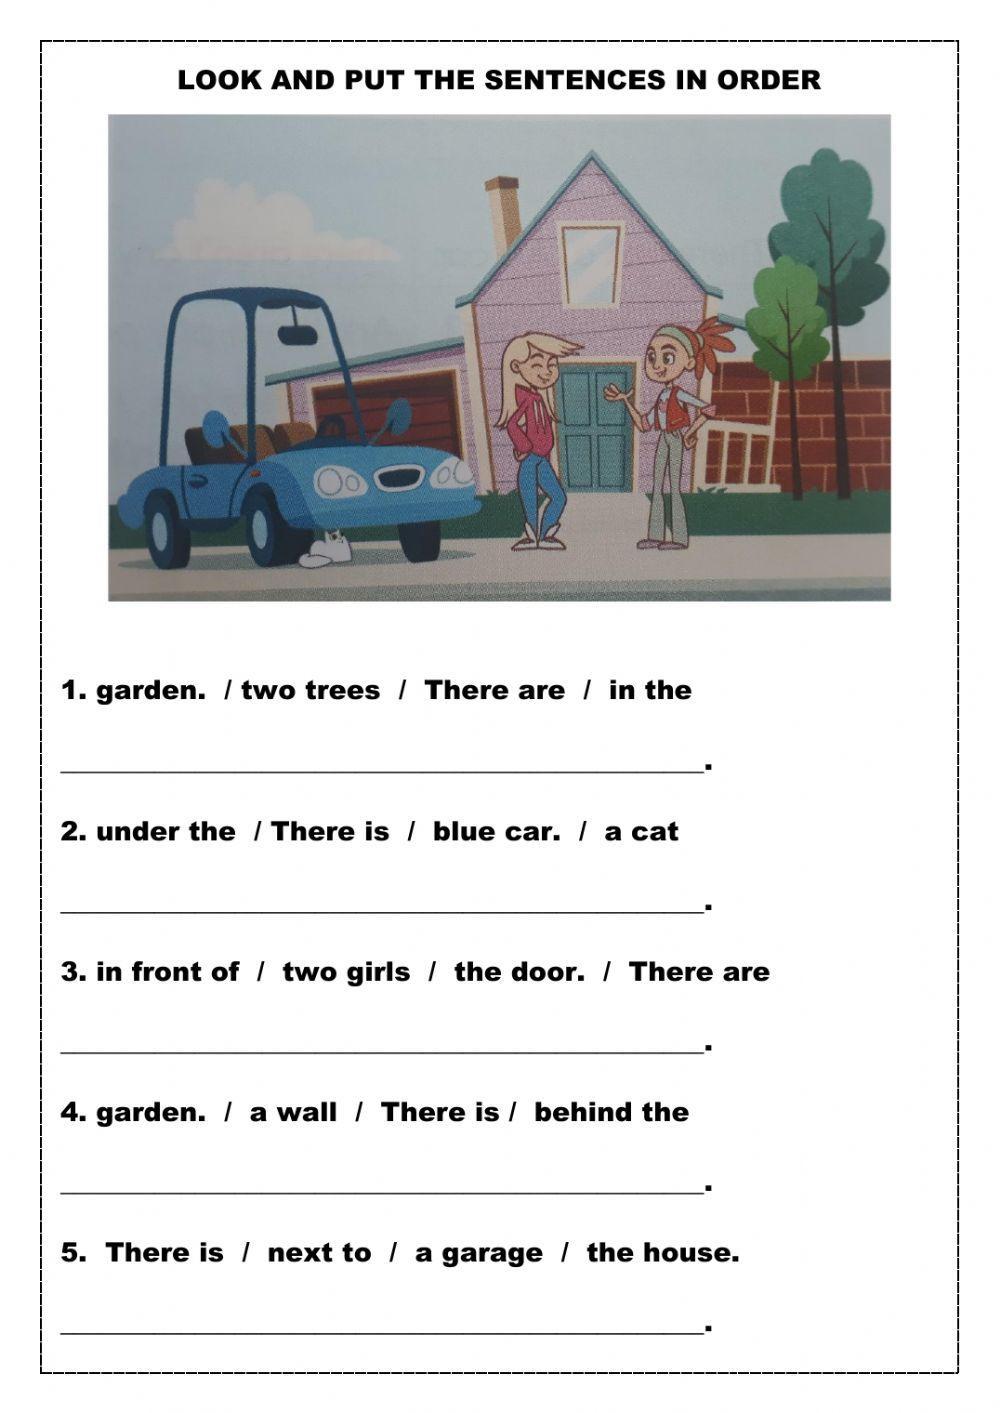 Look and put the sentences in order.